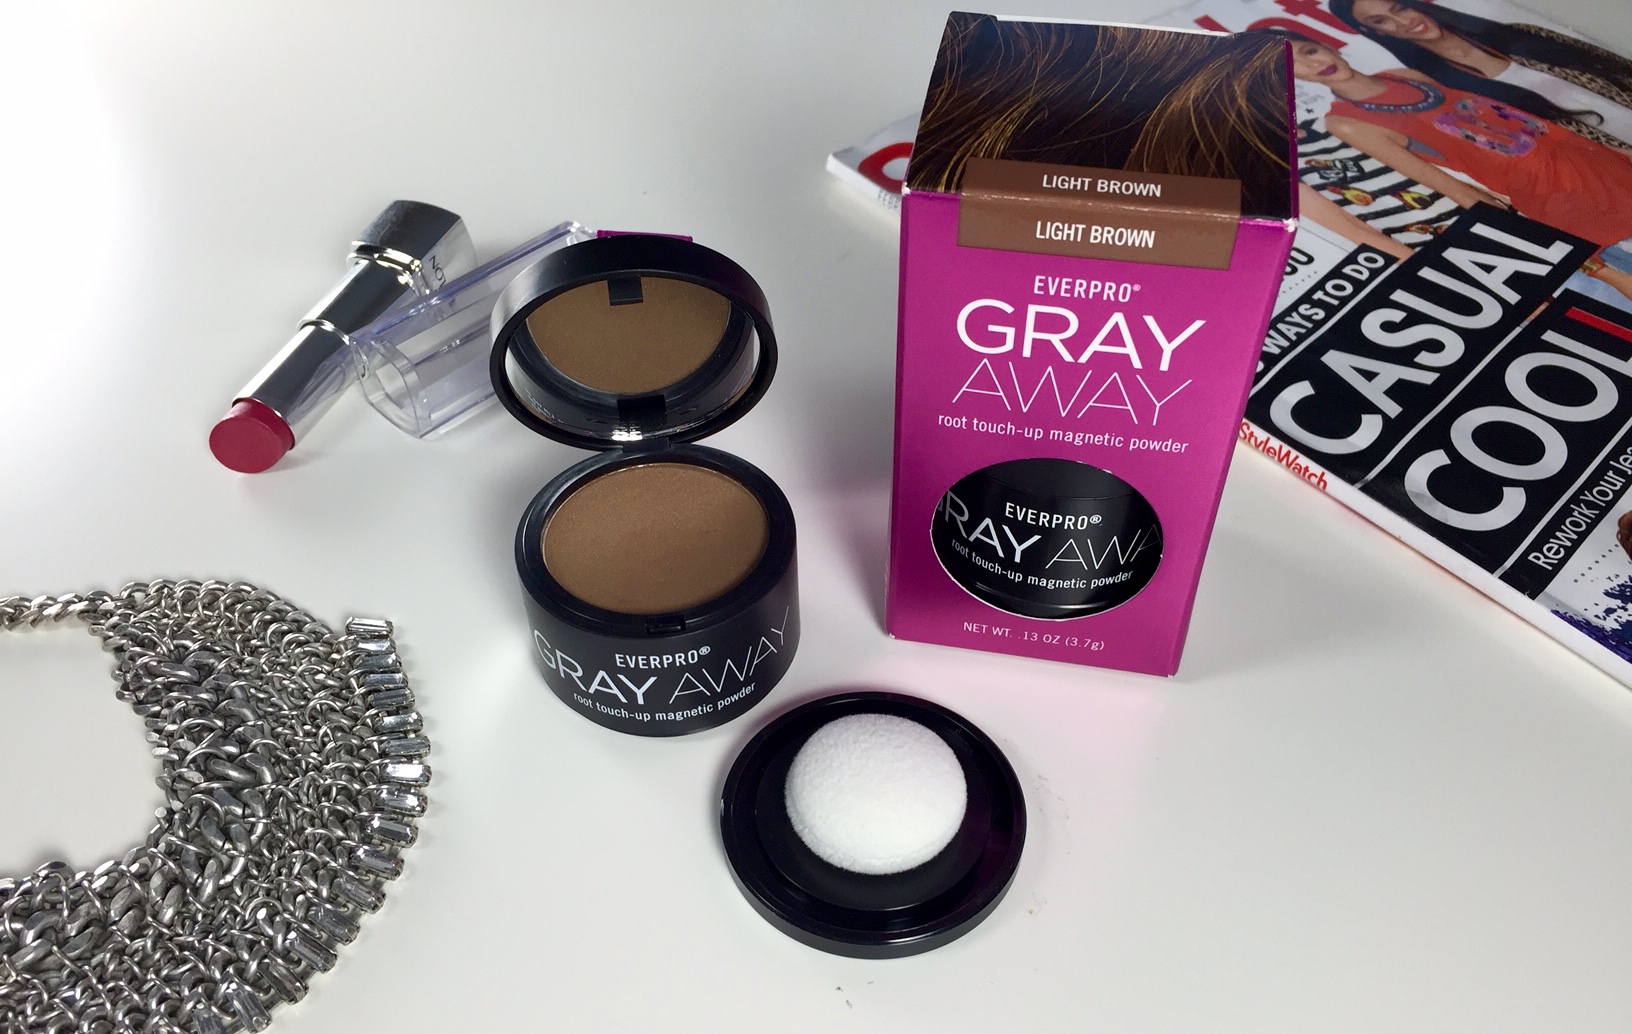 A Genius Way To Conceal The Gray : Gray Away Root Touch-Up Magnetic Powder